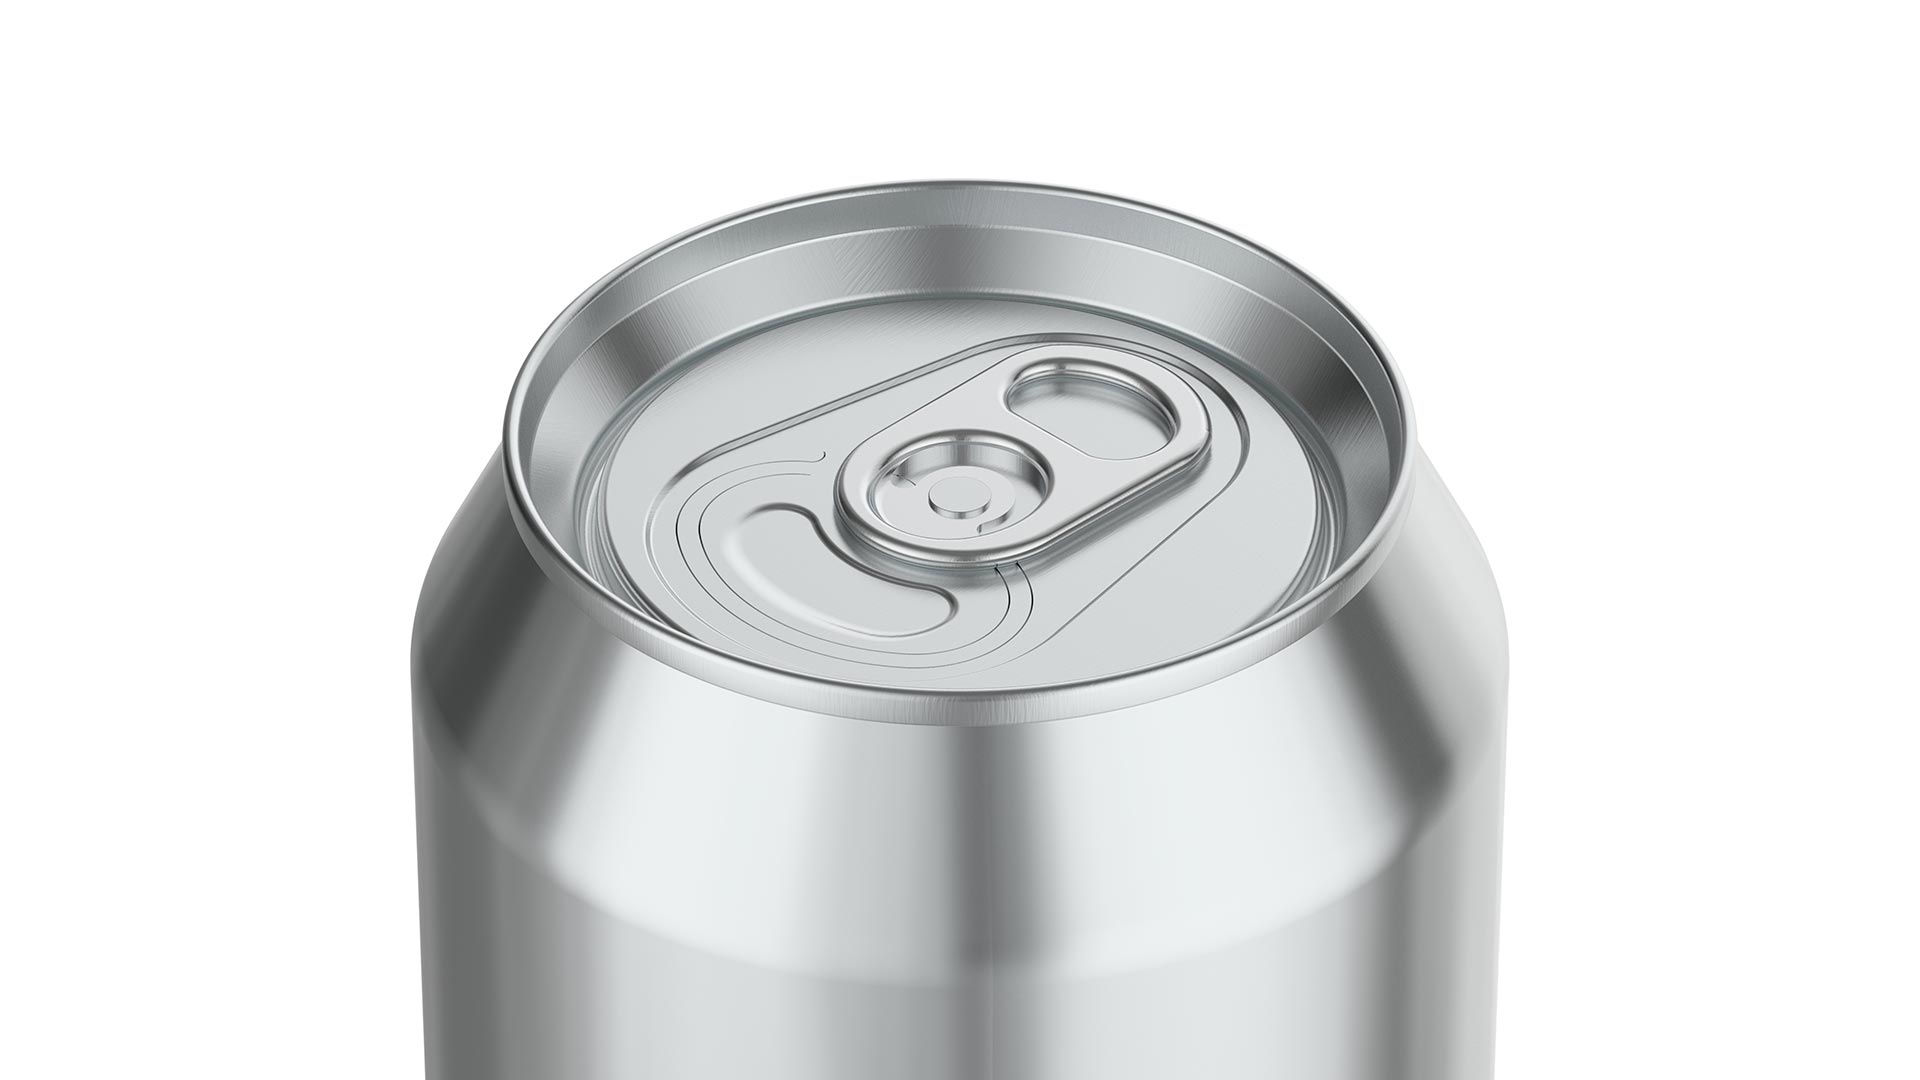 A superend beverage end on an undecorated can